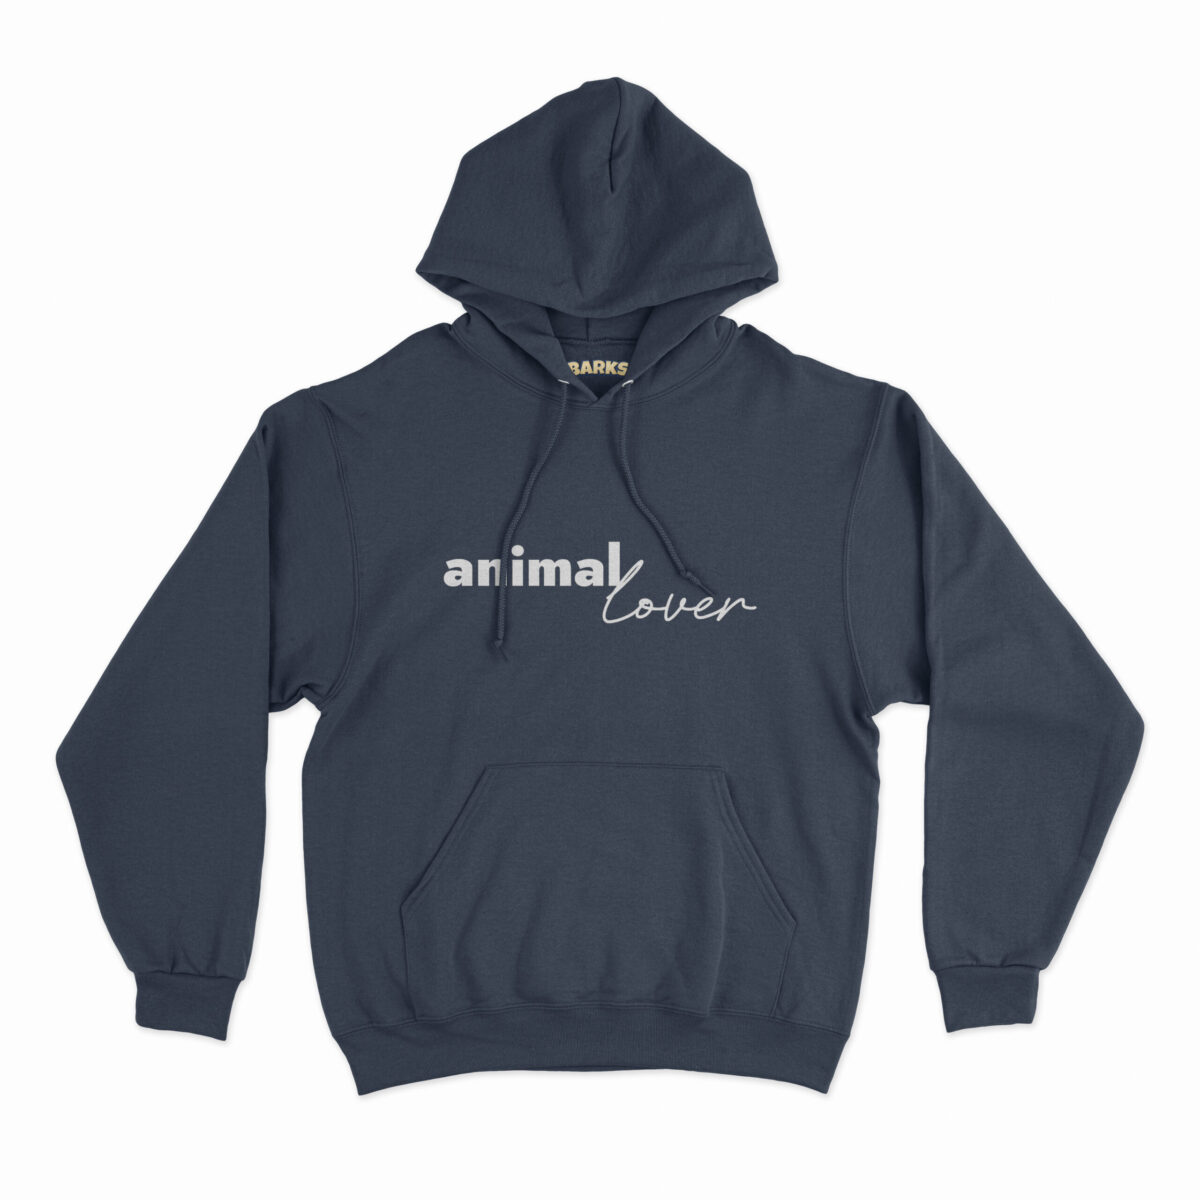 barks hoodie animal lover french navy scaled